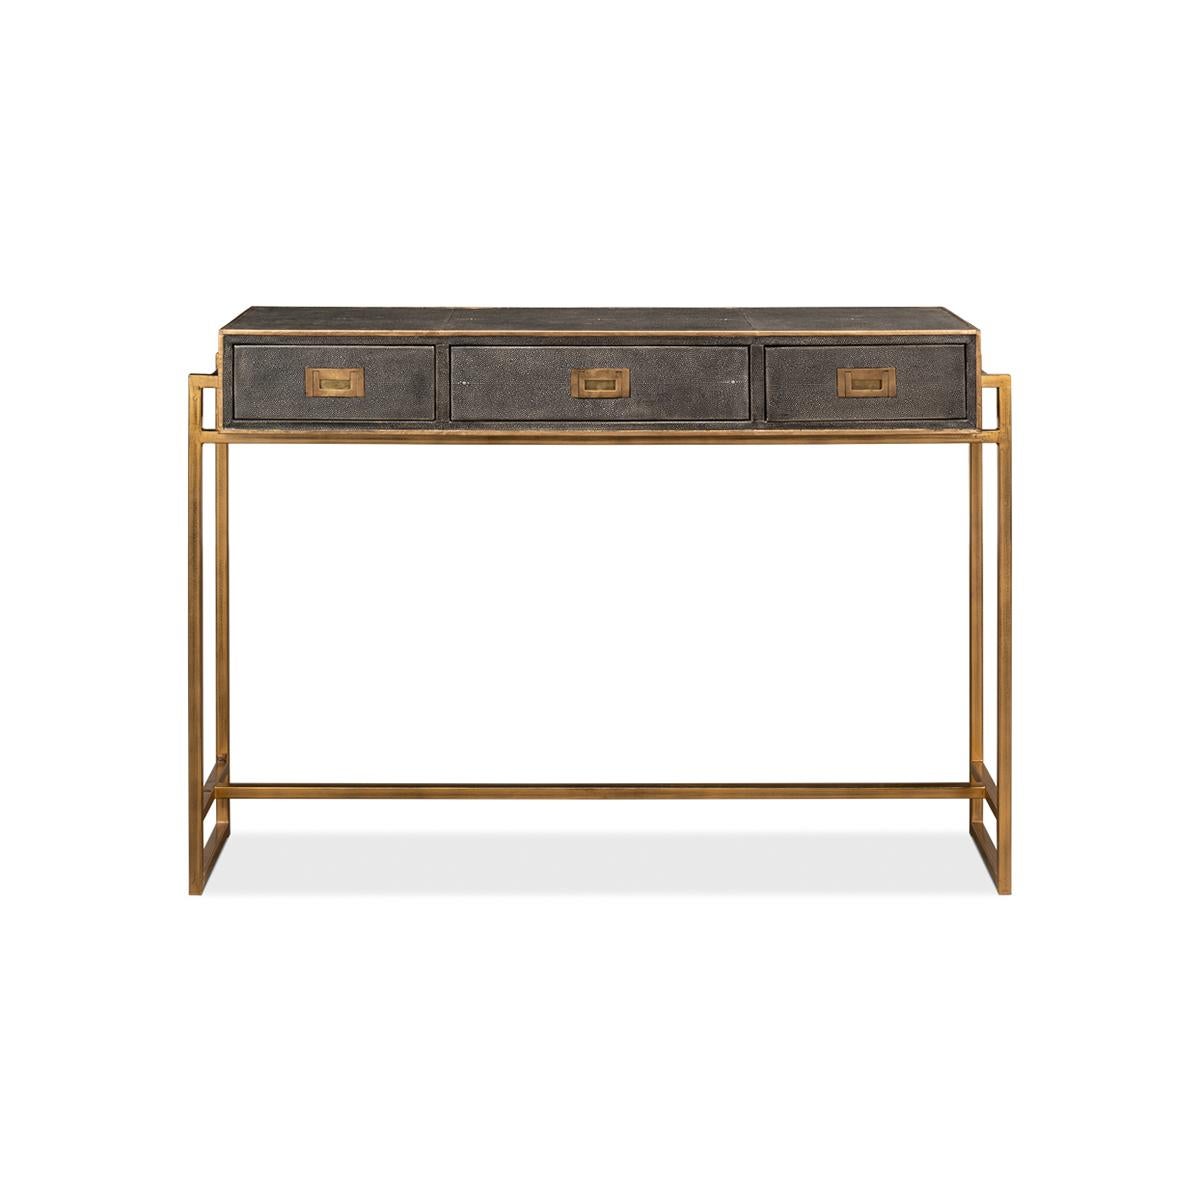 With embossed leather in an antique gray finish highlighted with gold trim. Three drawers lined with marbleized paper on a gilded iron cube form base.

Dimensions: 49